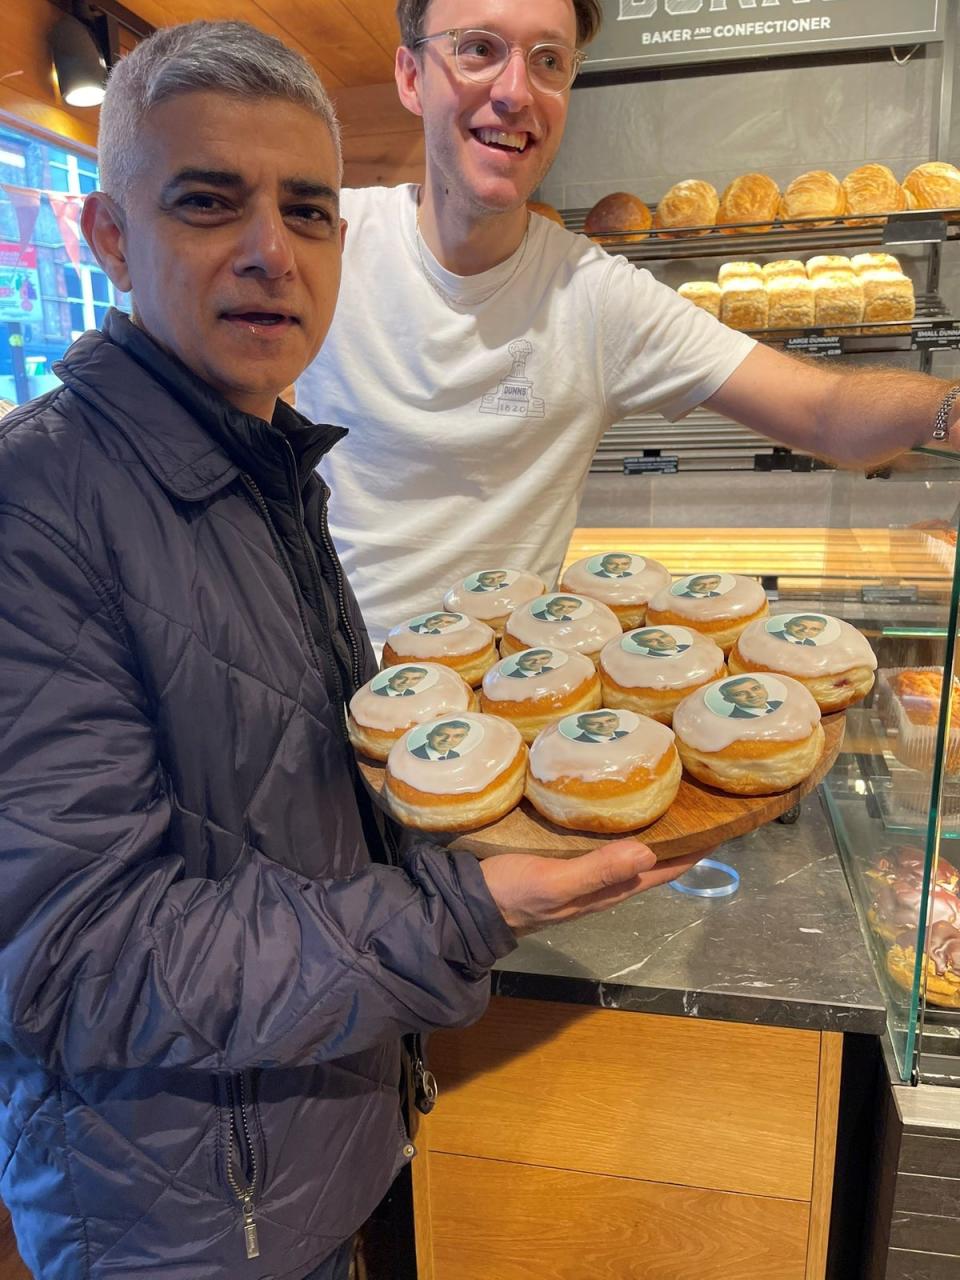 Doughnut: Is Sadiq Khan about to serve up victory on a plate? (Joanne McCartney/X)